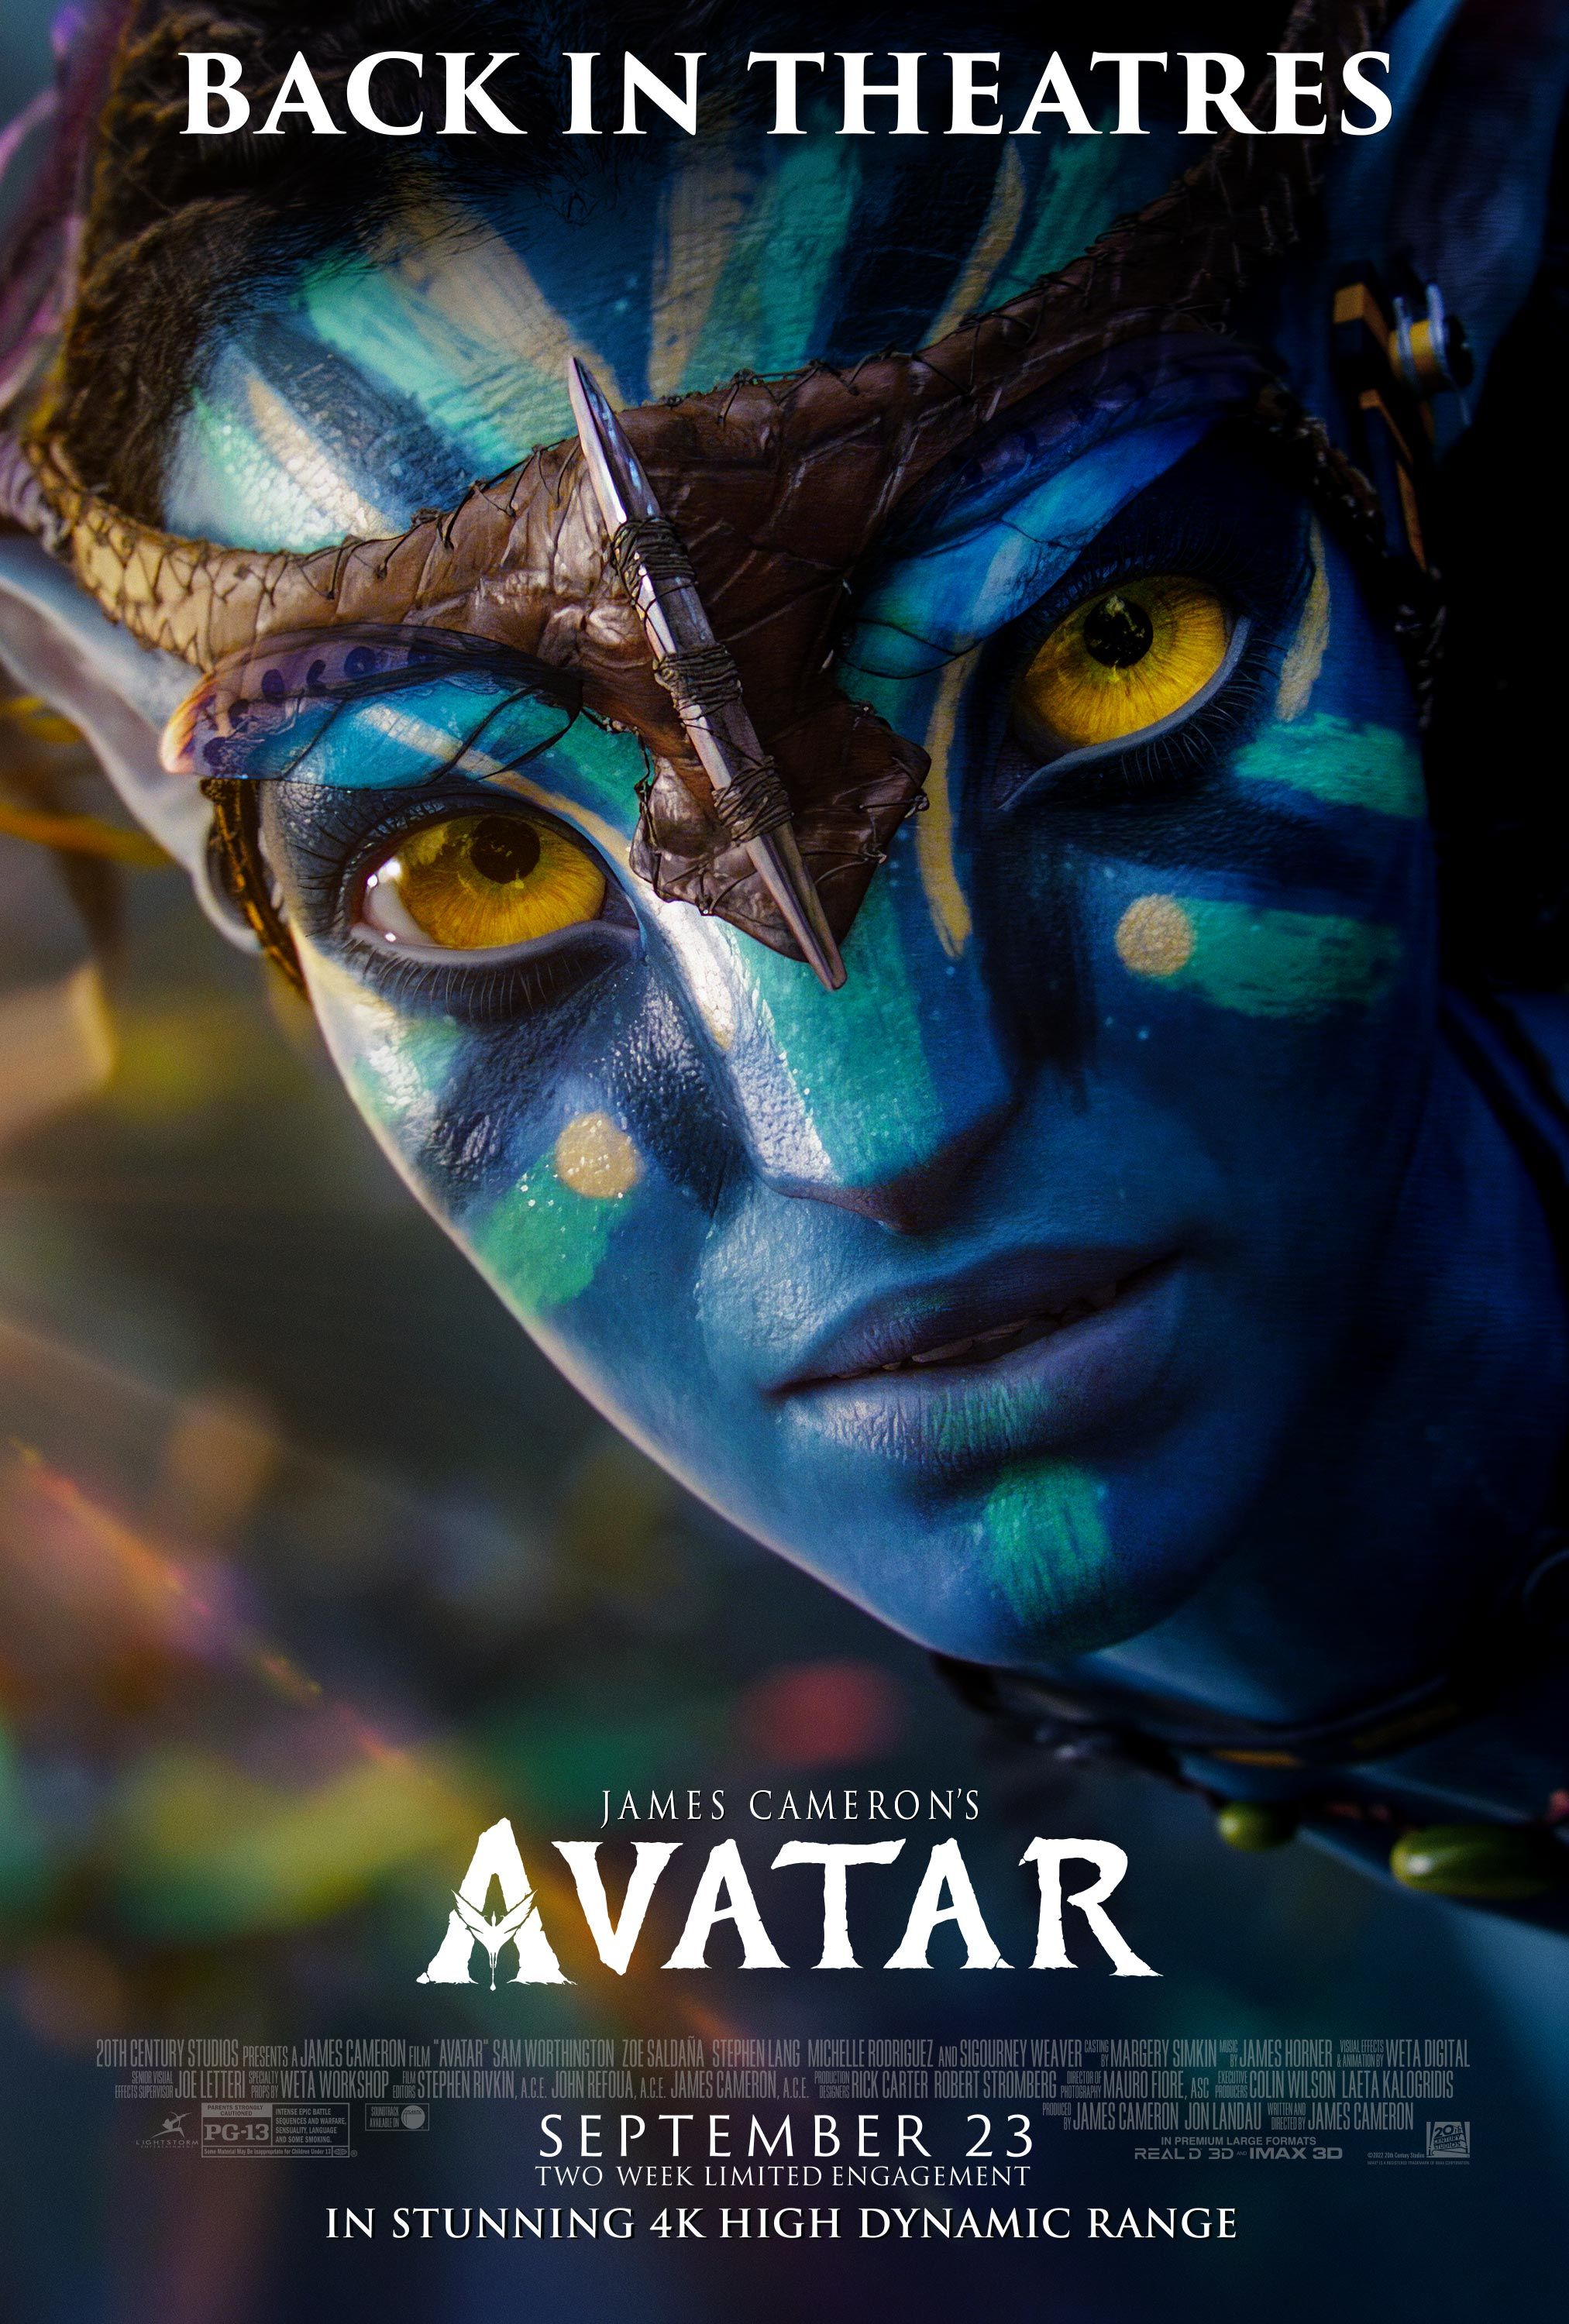 Avatar ReRelease Trailer Will Make You Want To See It In Theaters Again